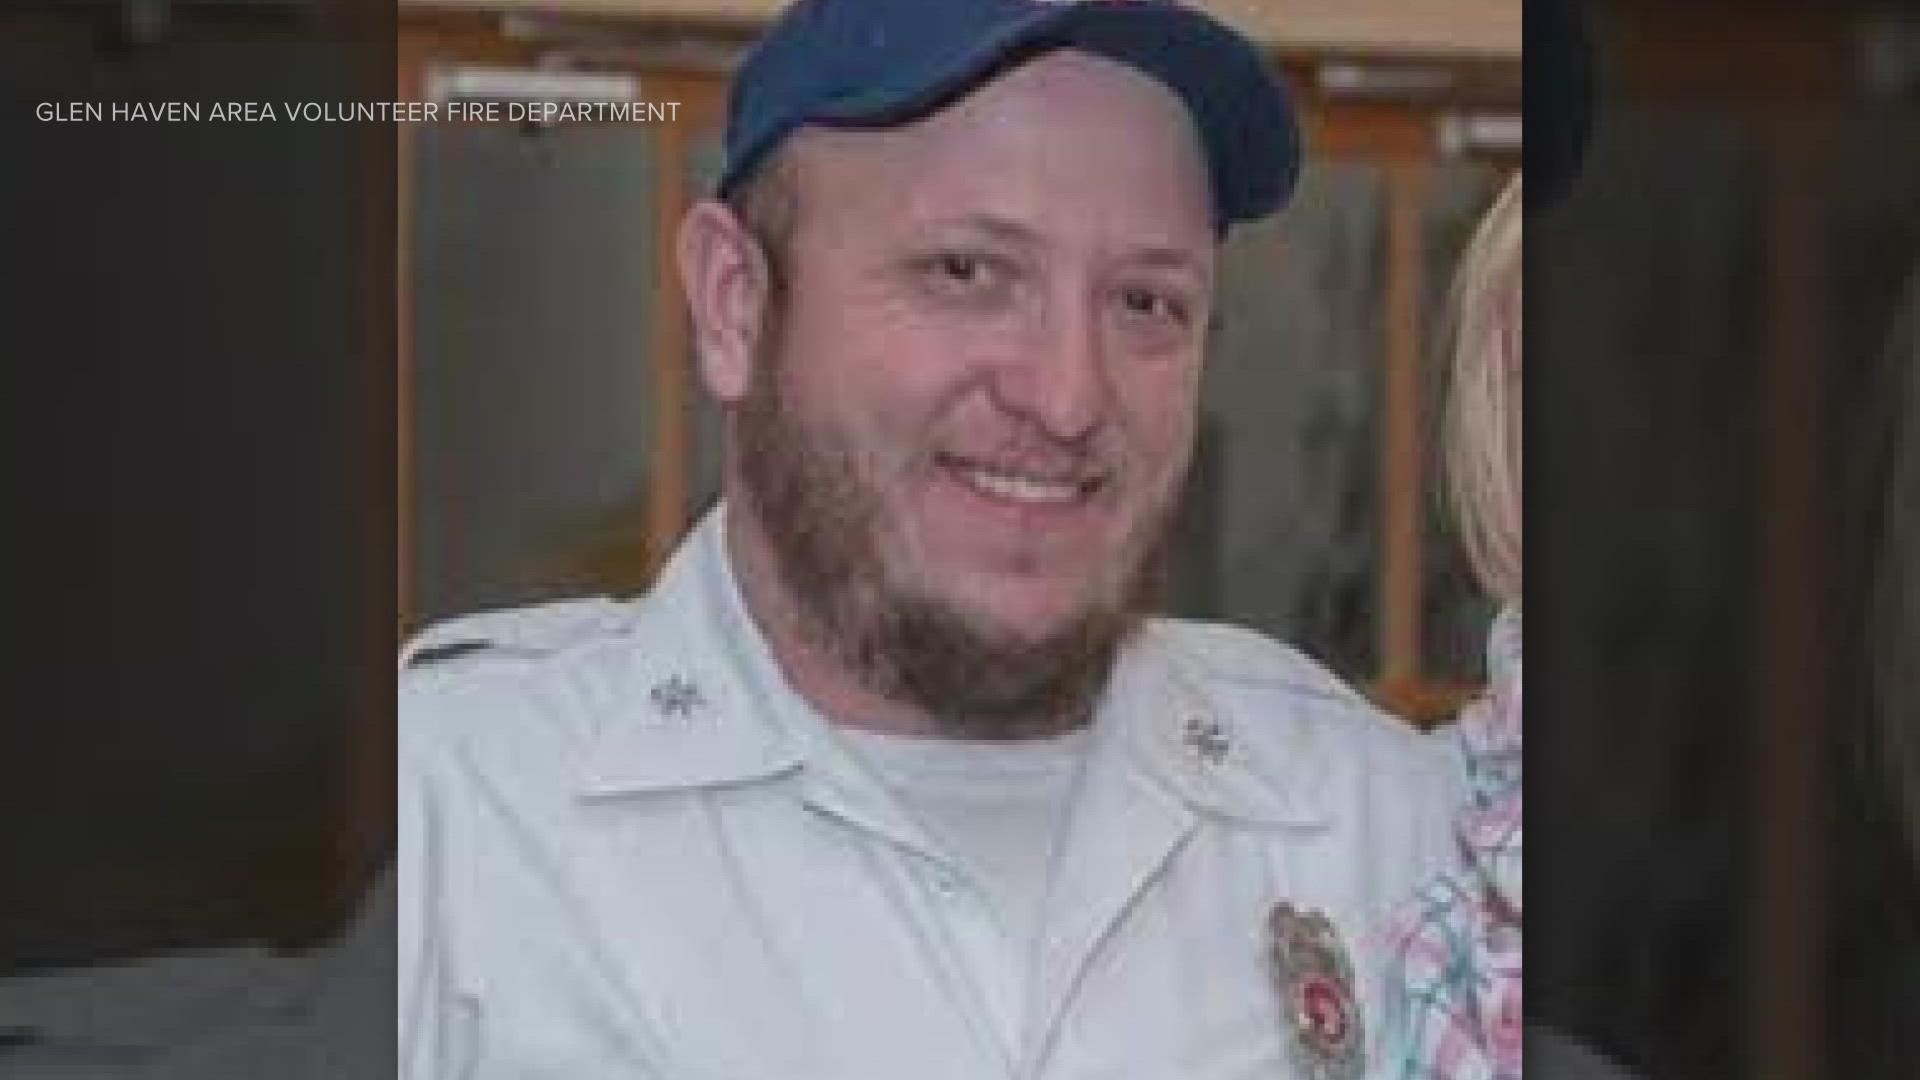 The victim was John Jaros, assistant chief of the Glen Haven Area Volunteer Fire Department, the department said Monday.